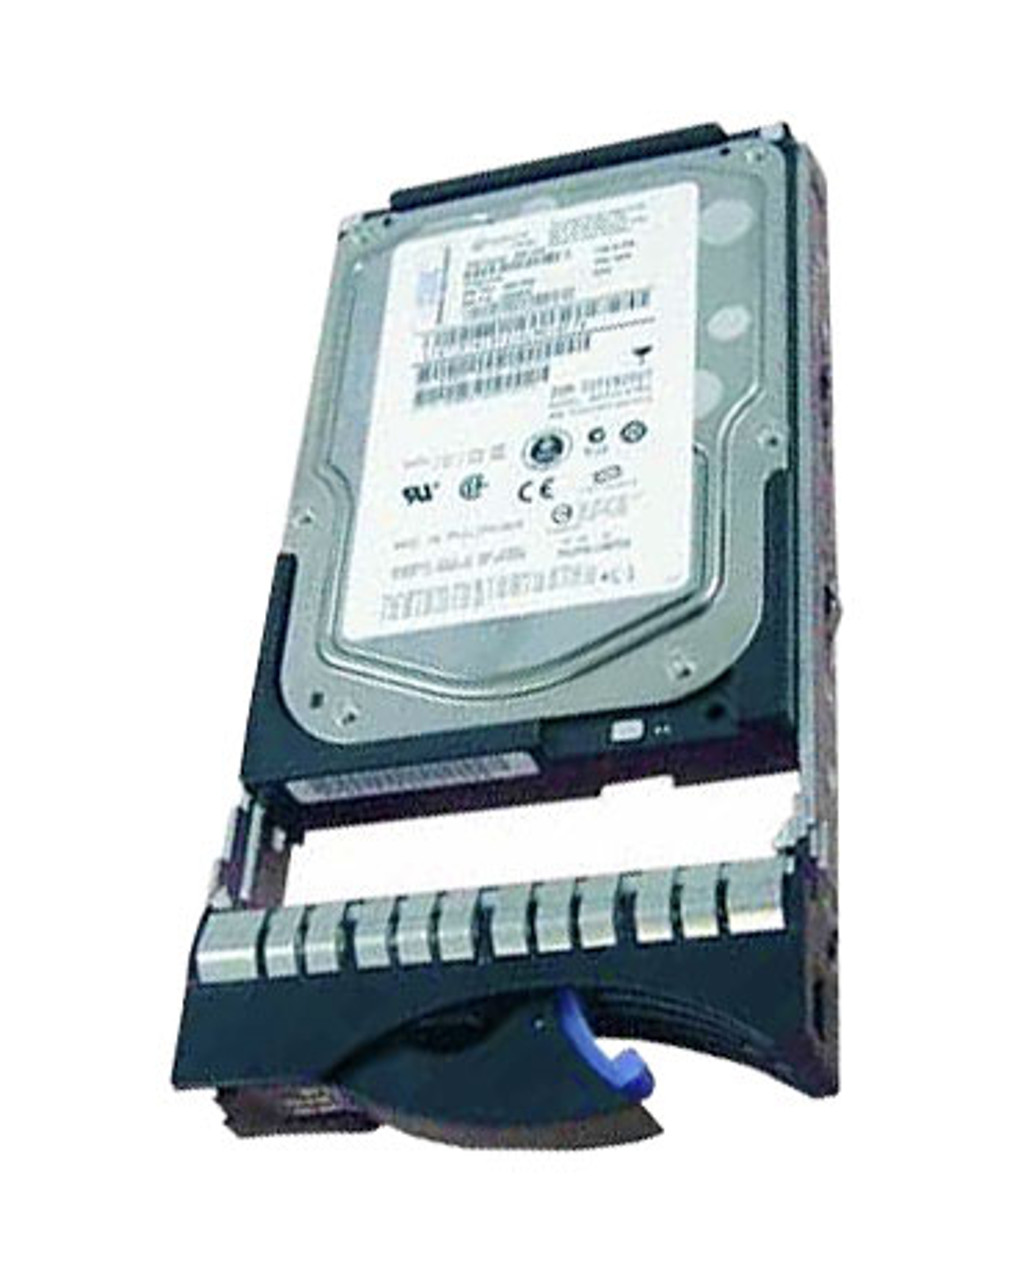 06P5758 - IBM 18.2GB 10000RPM 80-Pin Ultra-160 SCSI 3.5-inch Hot Pluggable Hard Drive with Tray for X-Series